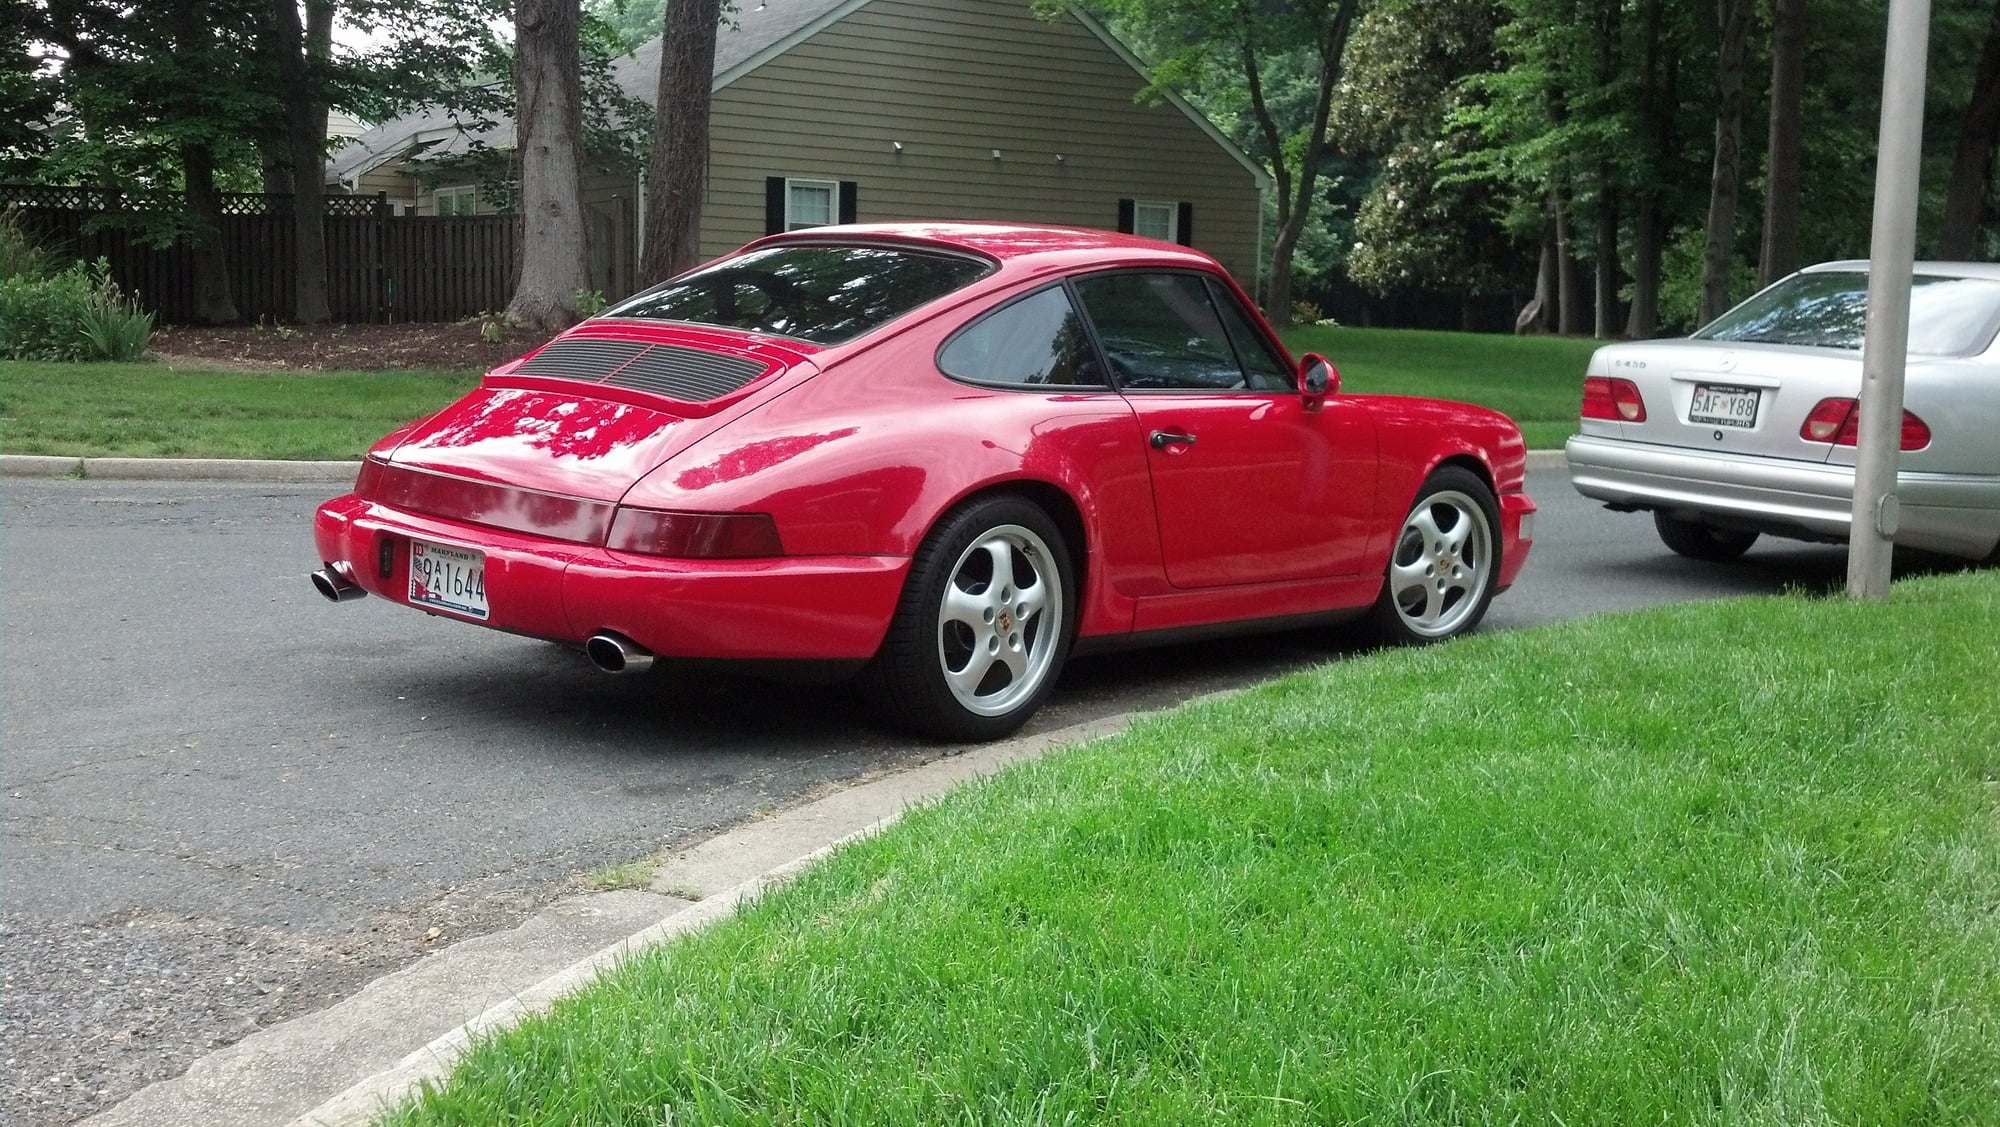 1990 Porsche 911 - 1990 964 - Used - VIN will post - 106,000 Miles - Manual - Coupe - Red - Severna Park, MD 21146, United States